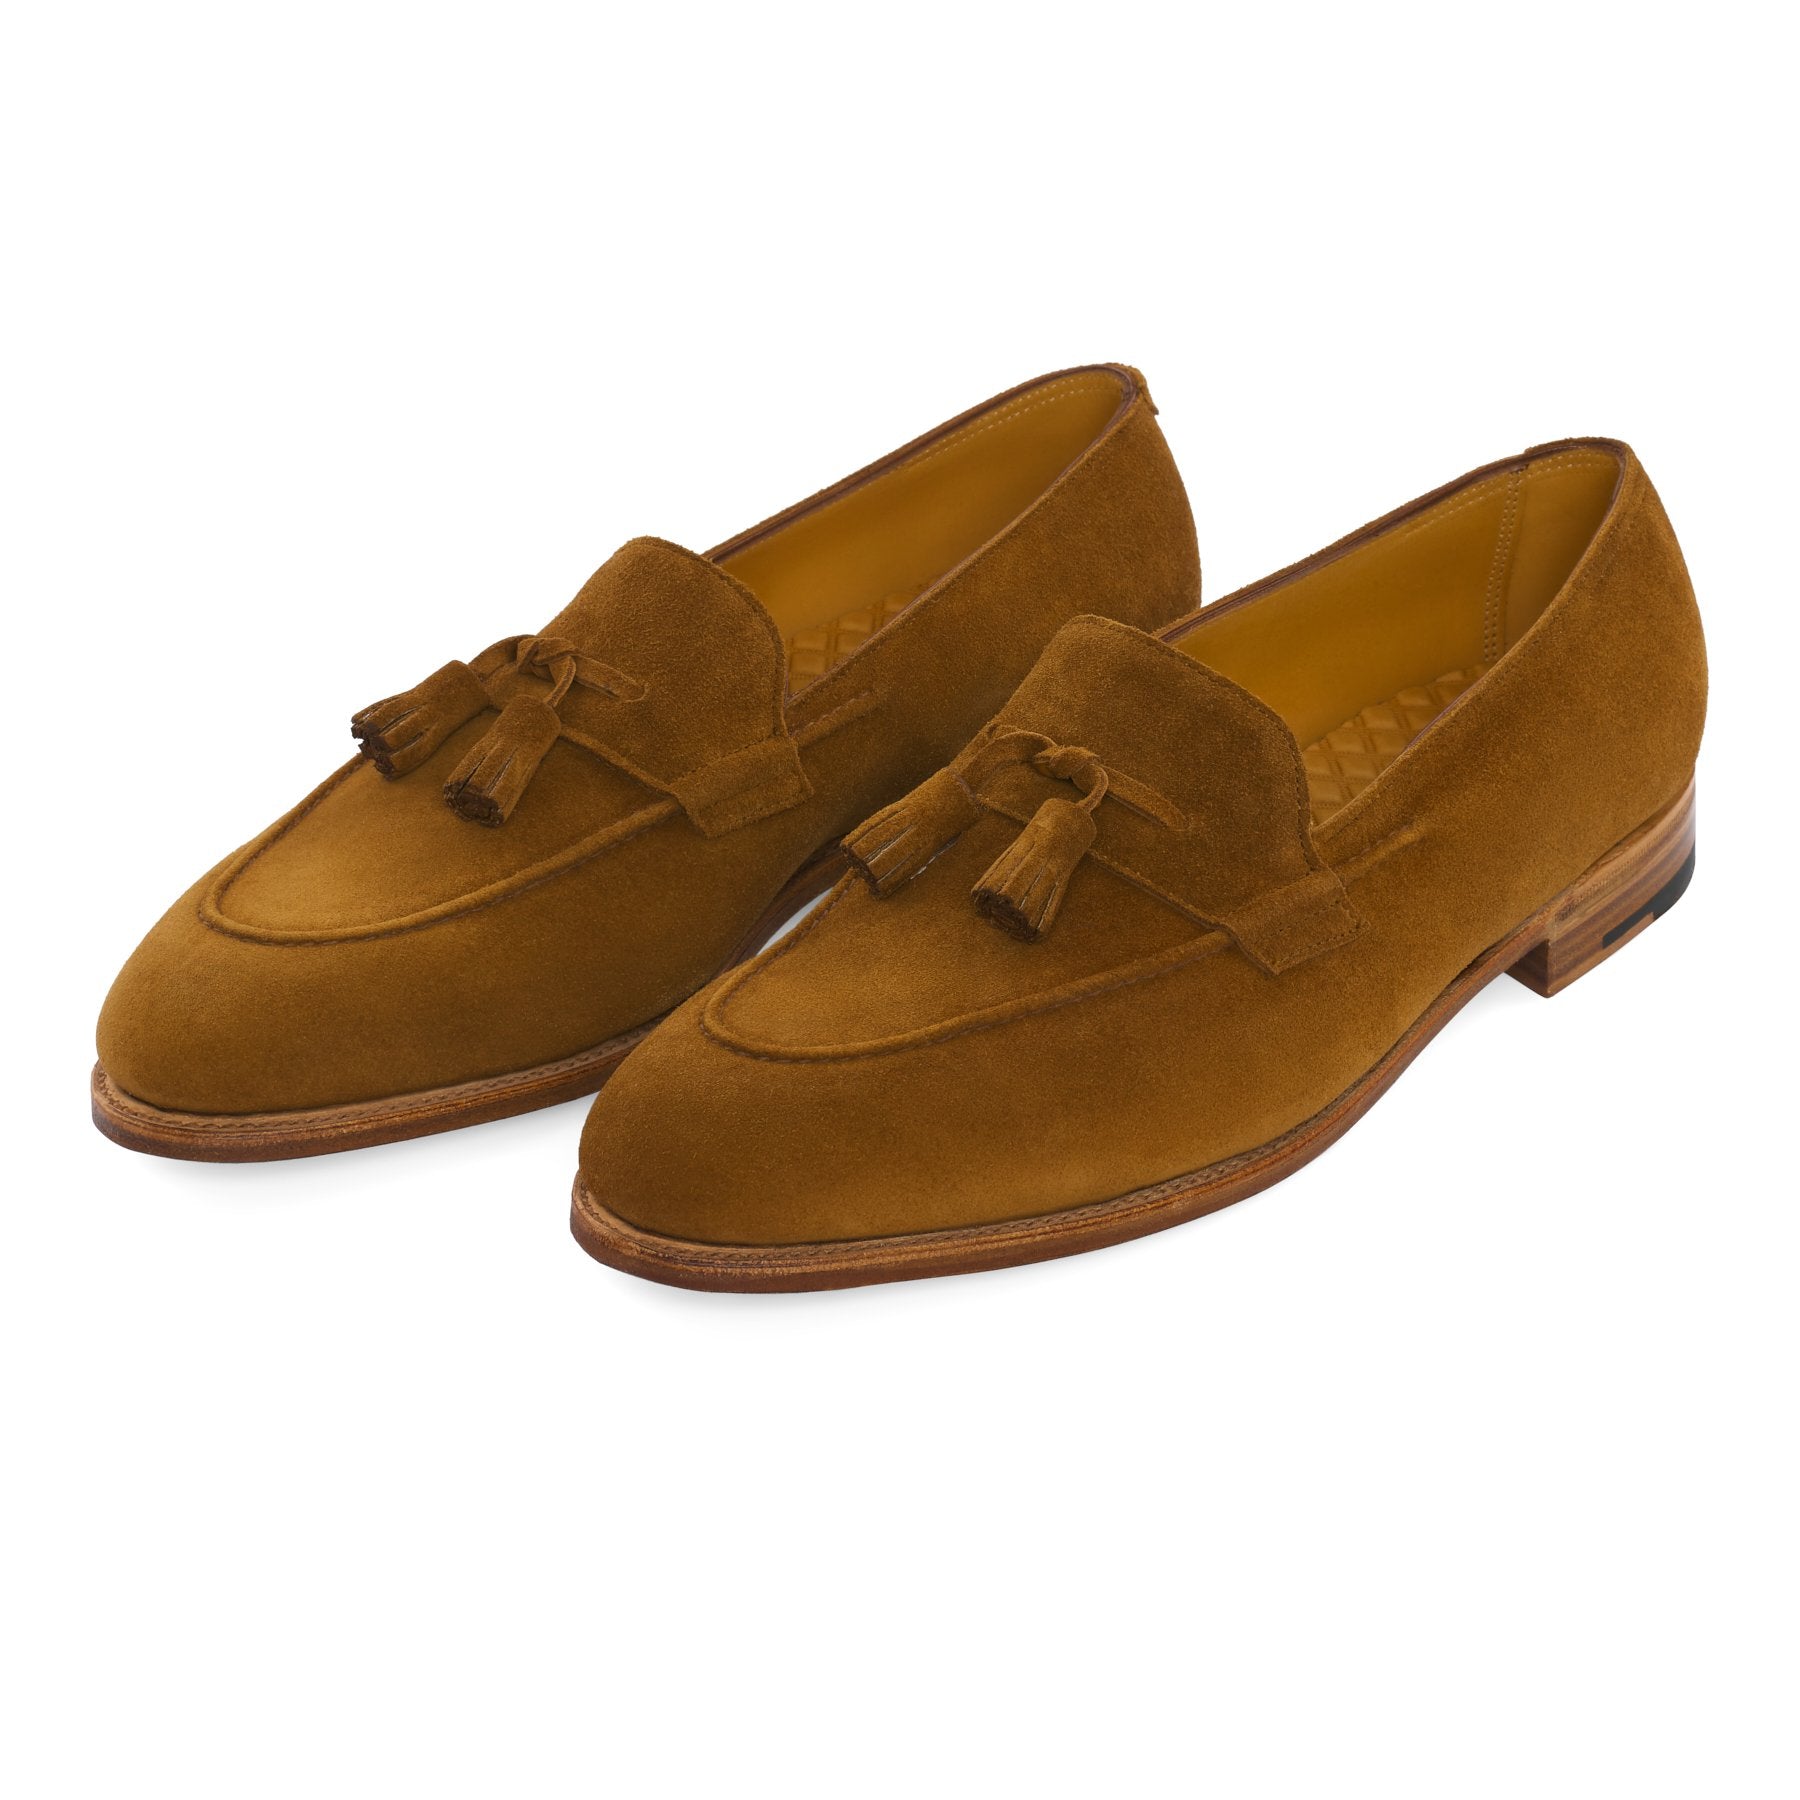 "Callington" Suede Loafer with Hand-Stitching Apron in Tobacco Brown